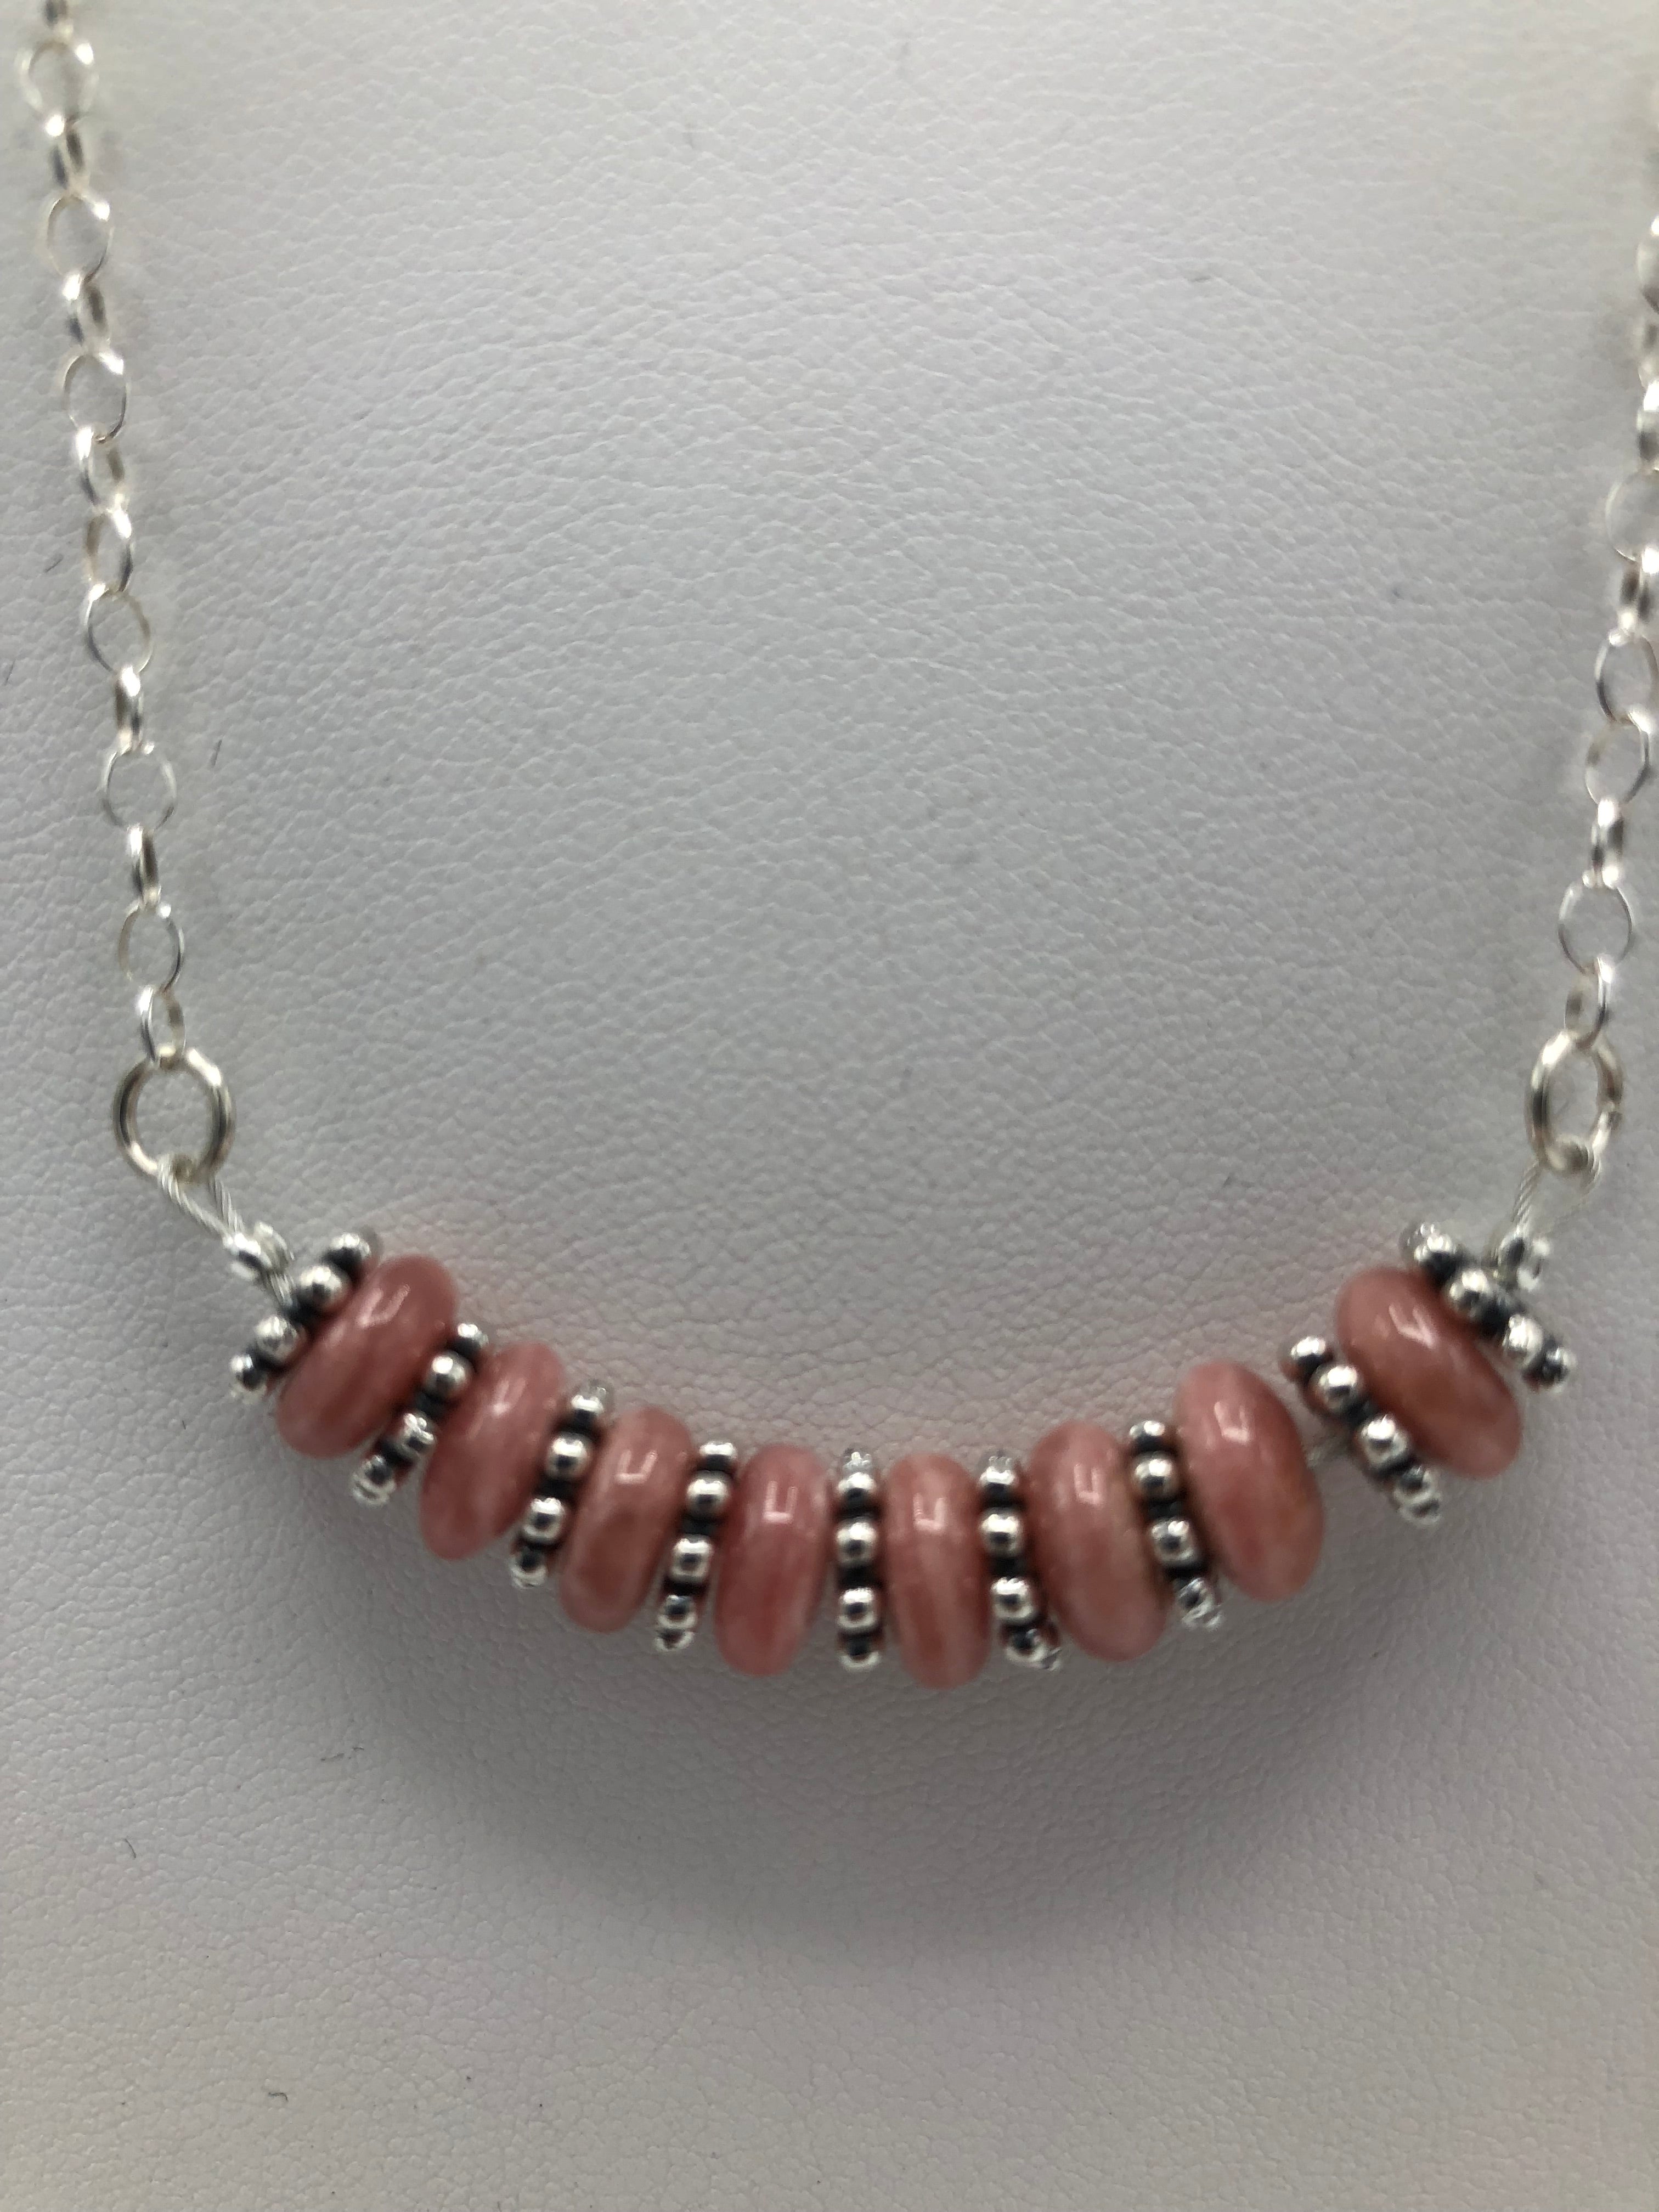 Beautiful Rhodochrosite Necklace with Sterling silver chain